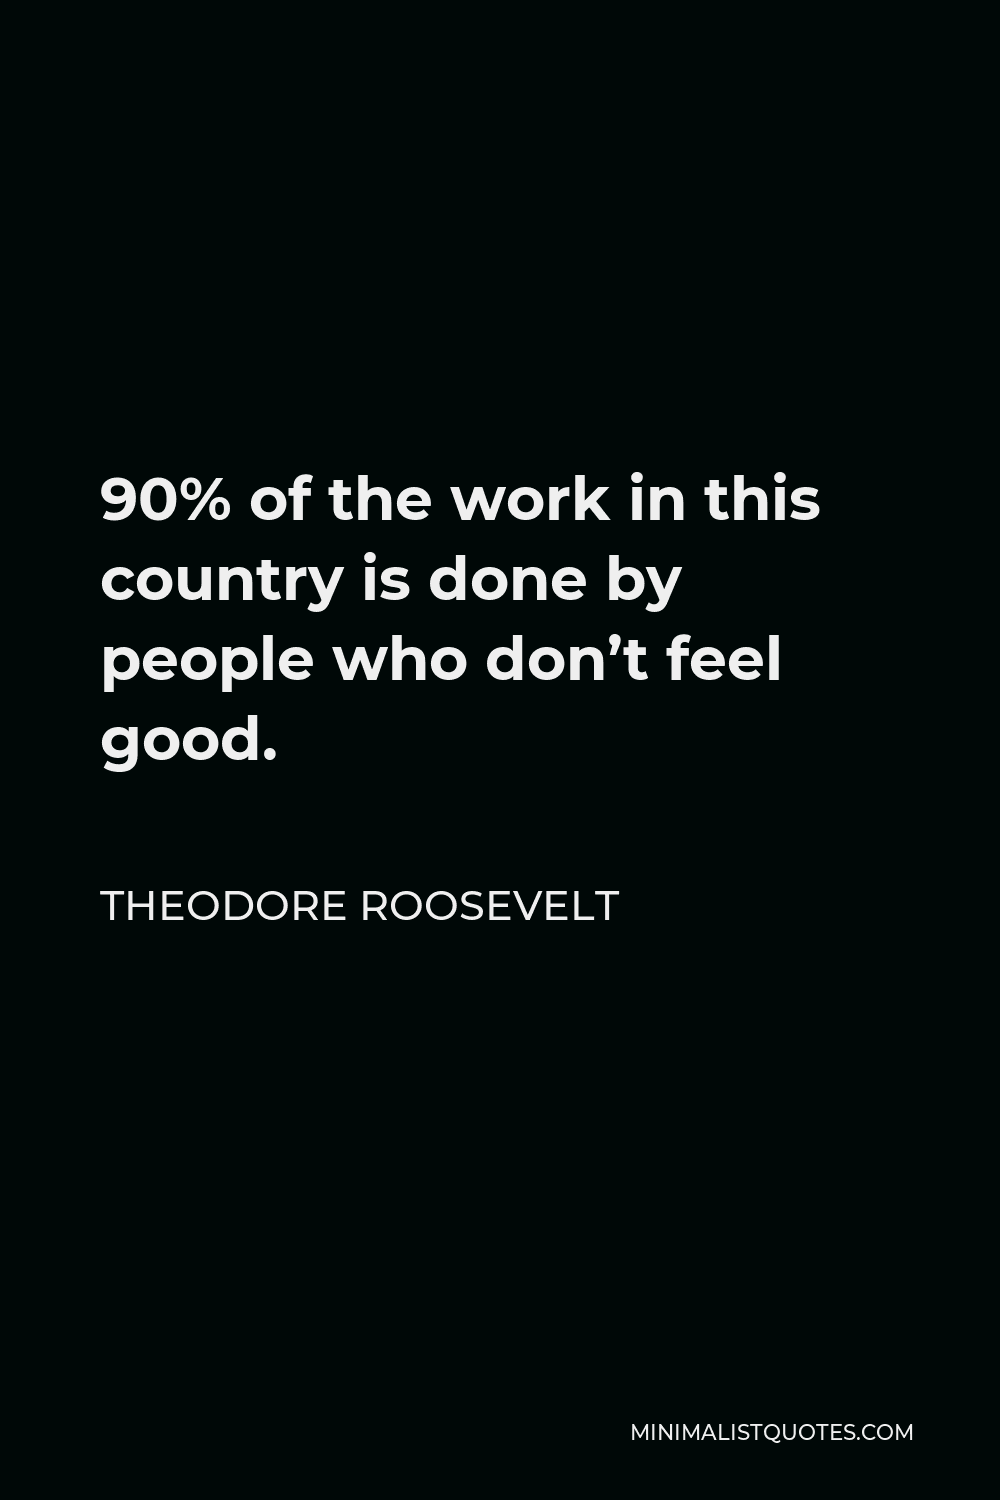 Theodore Roosevelt Quote - 90% of the work in this country is done by people who don’t feel good.